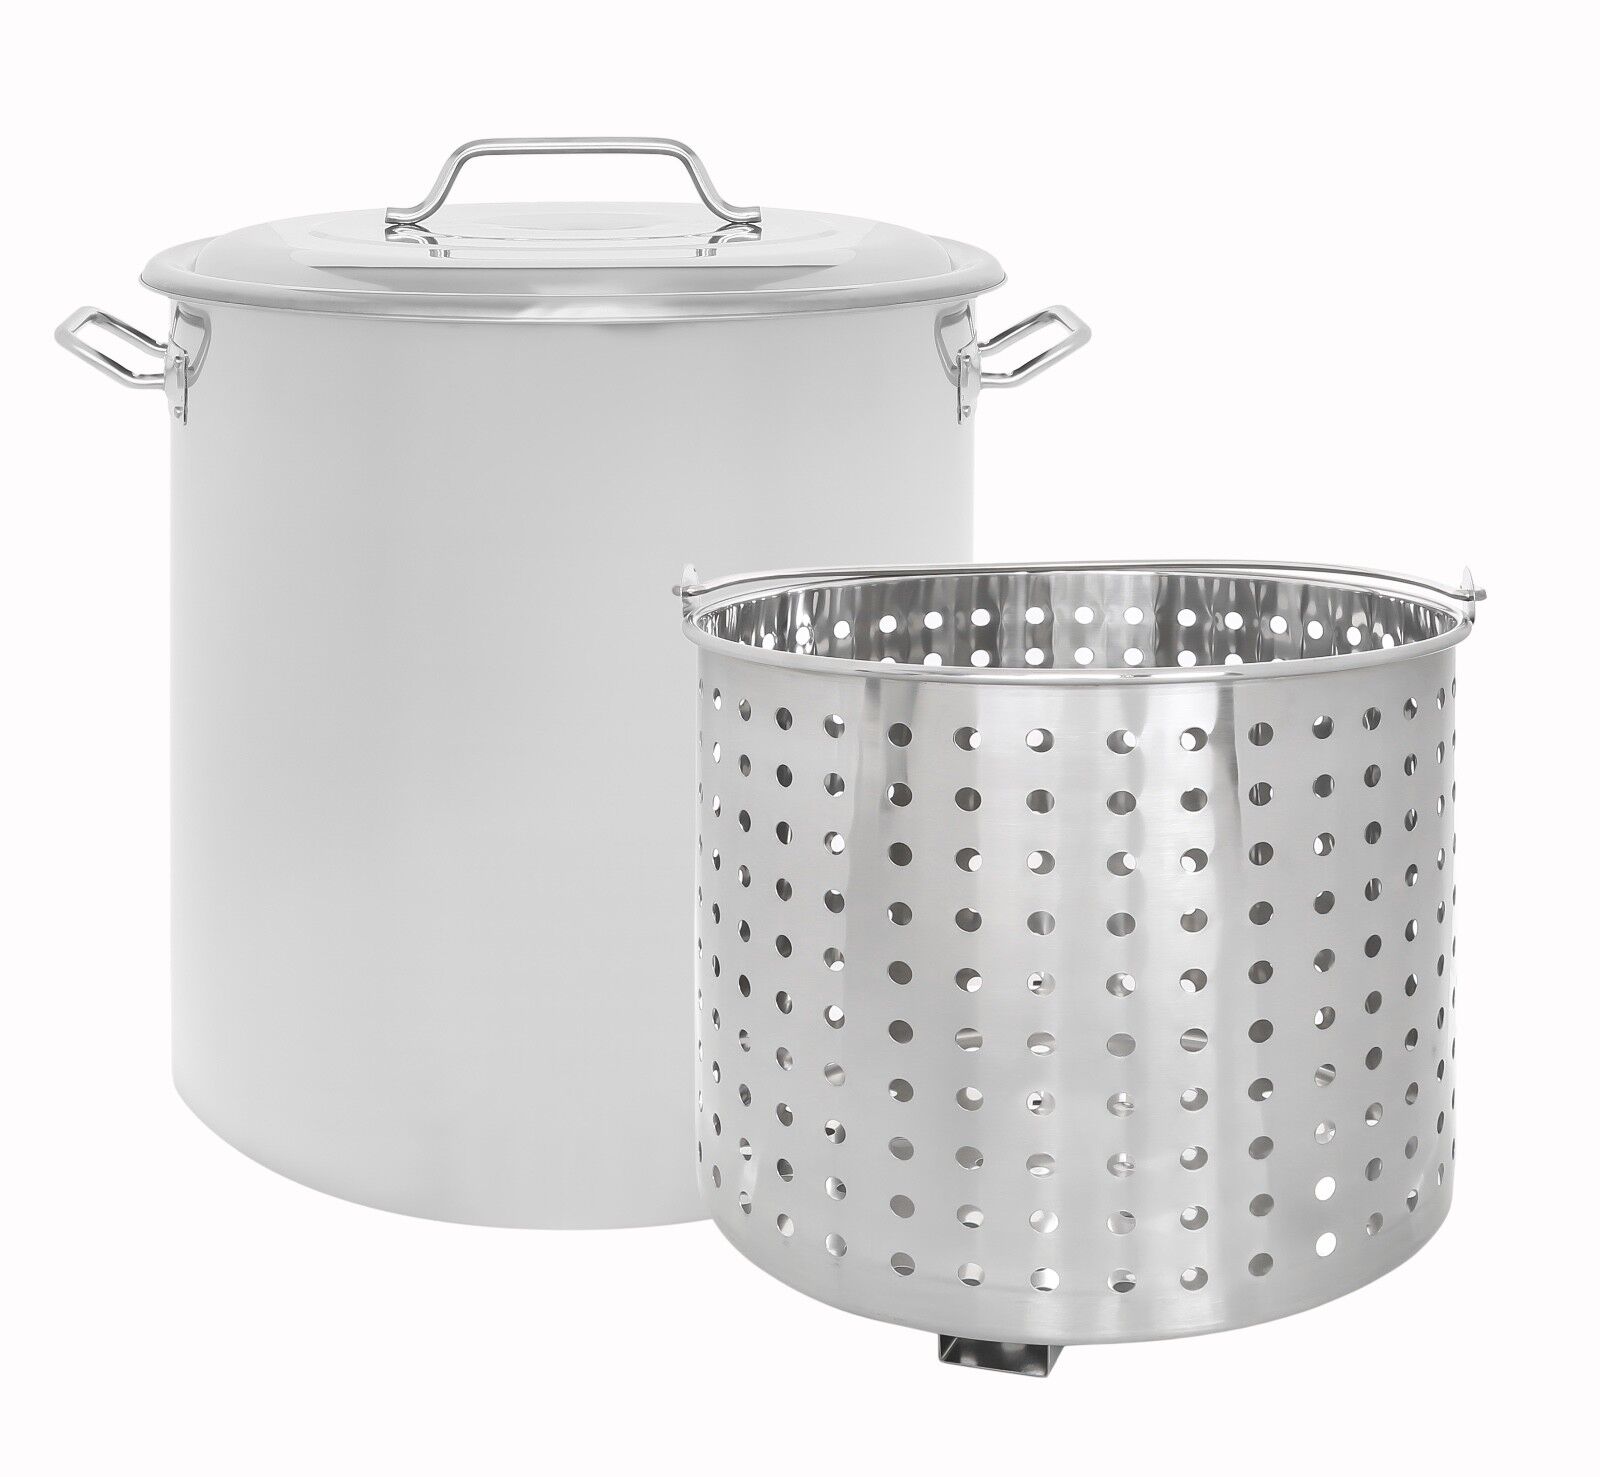 CONCORD Stainless Steel Stock Pot w/ Steamer Basket Cookware Boiling Steaming